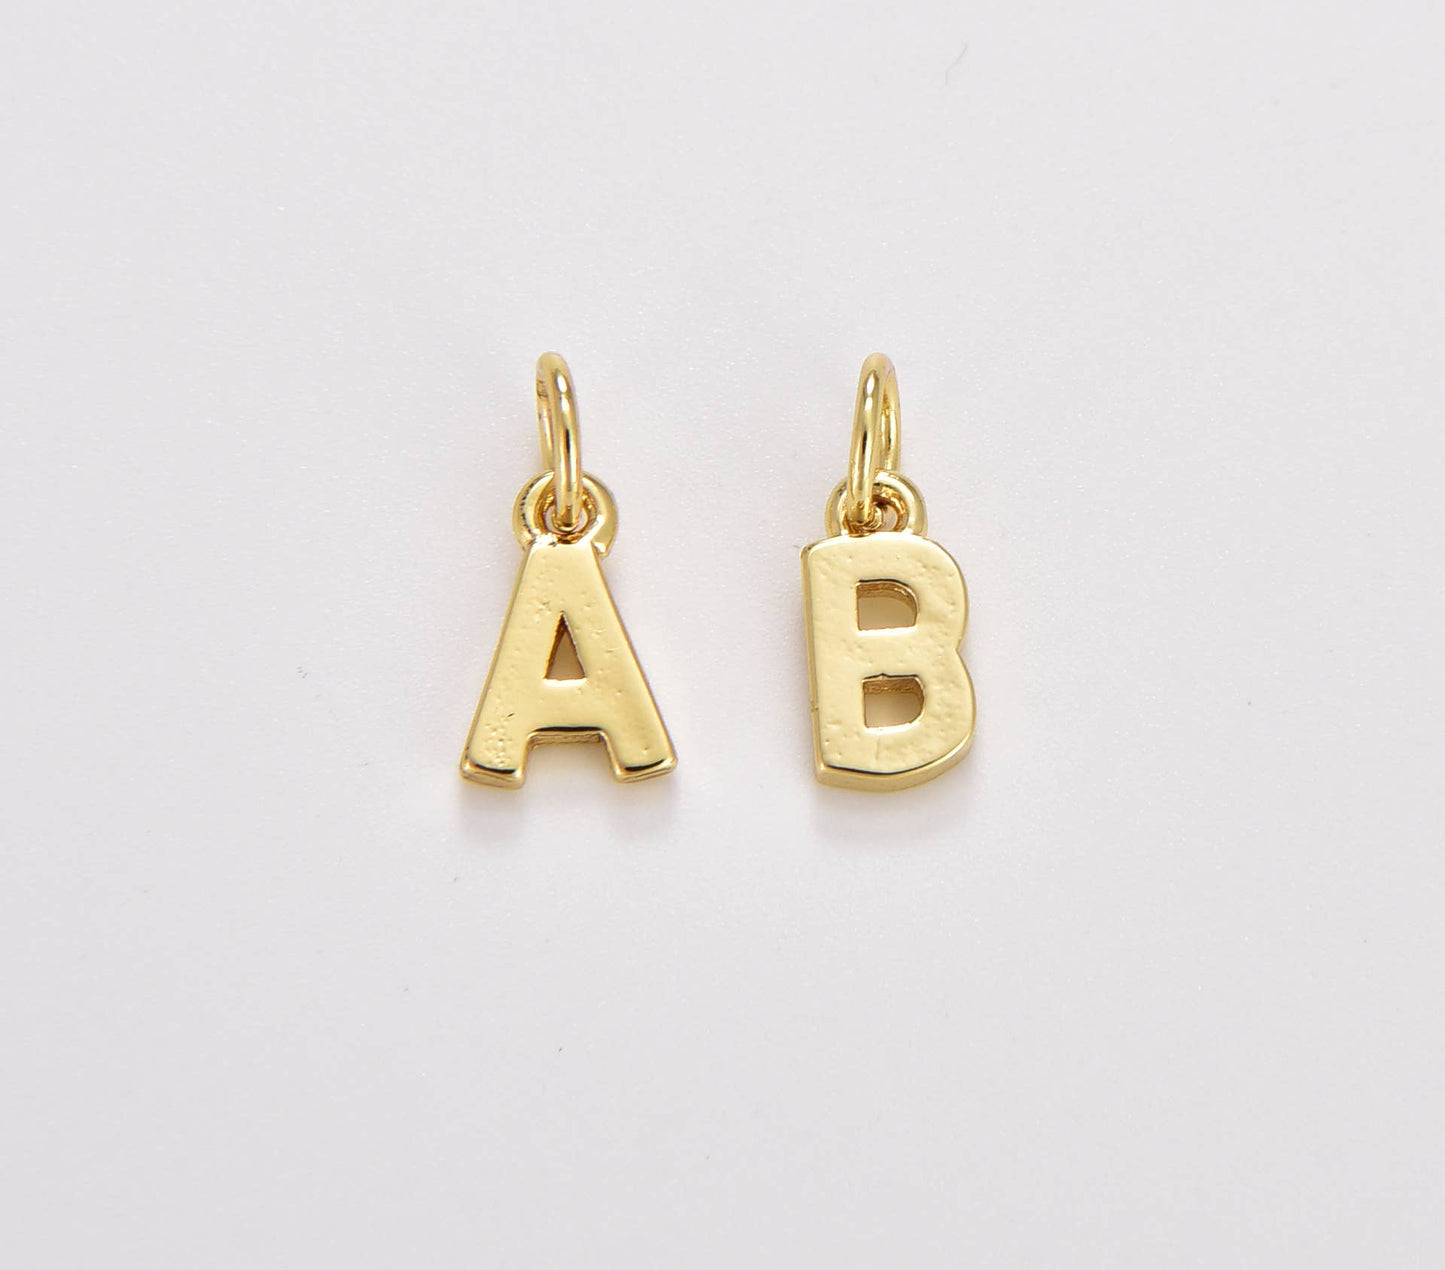 Gold Filled Personalized Initial Letter Charm, Gift CP1242: E